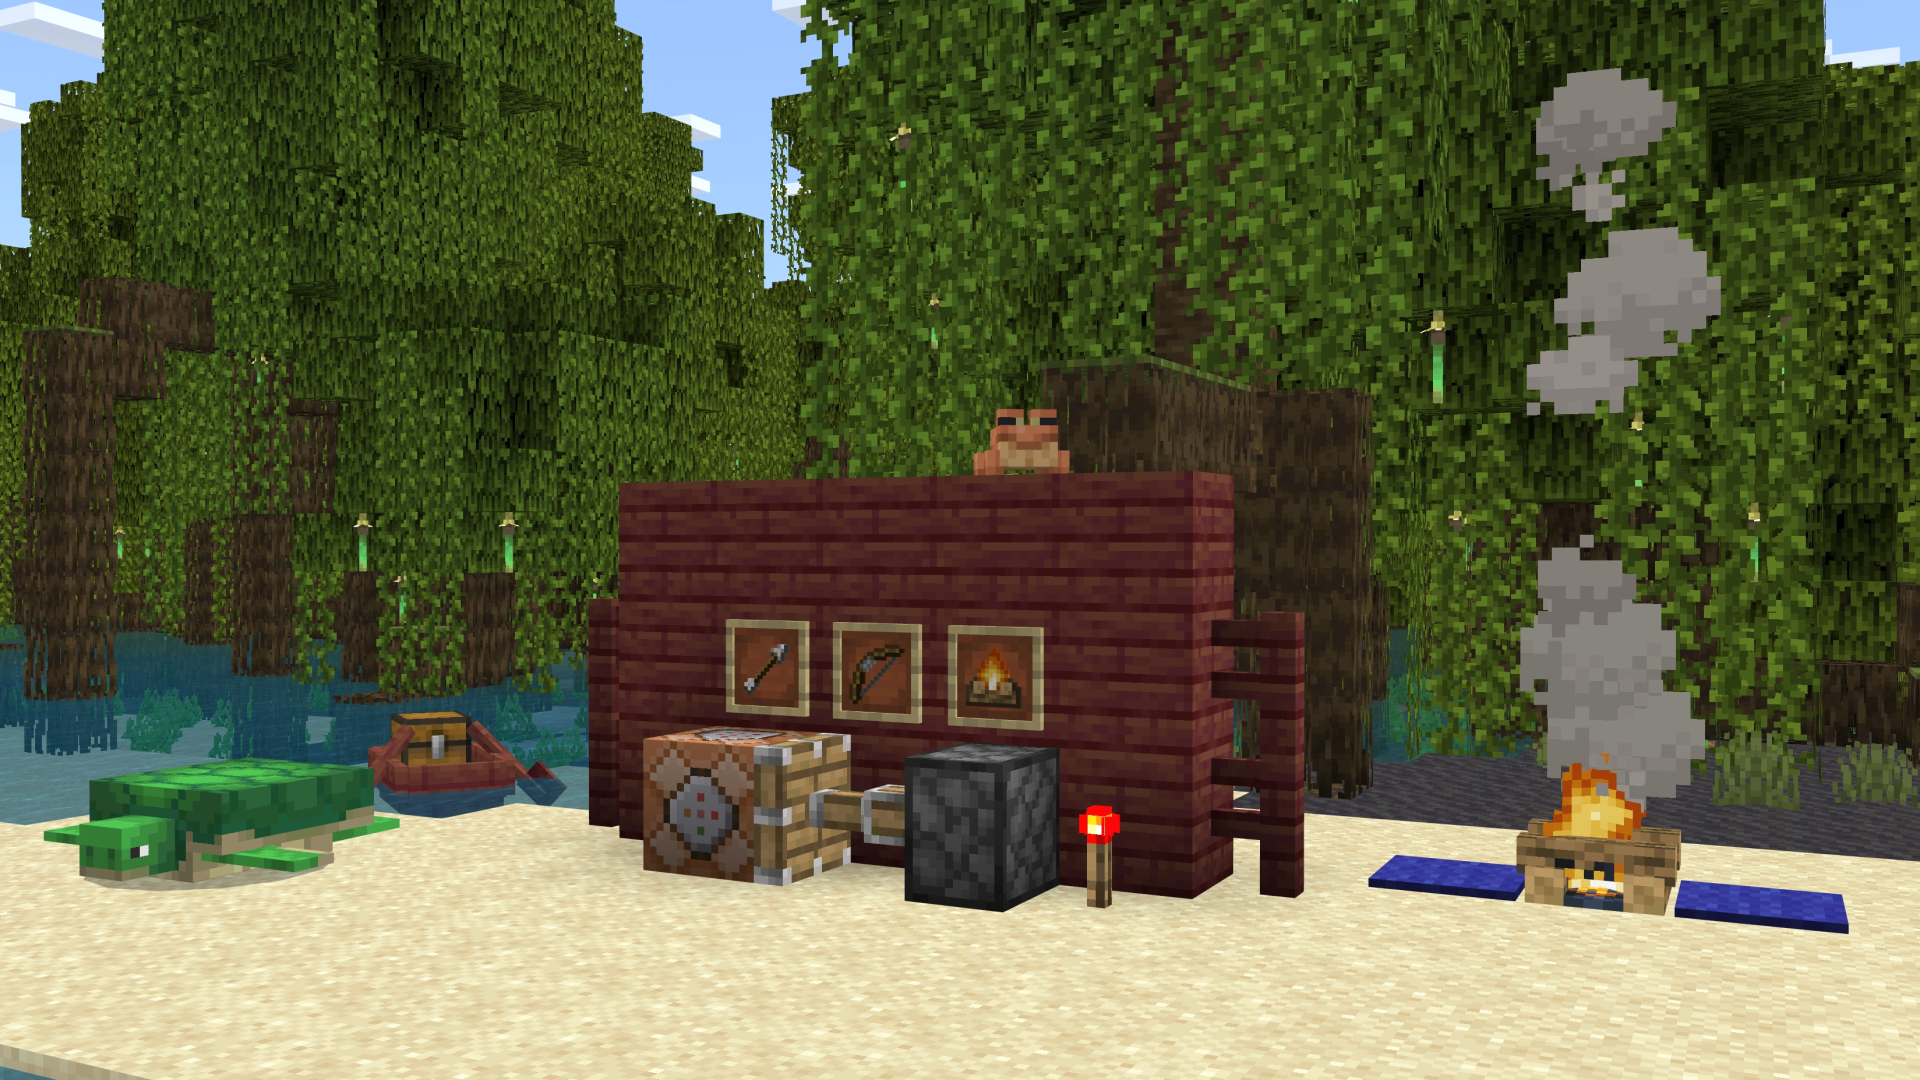 A Minecraft screenshot, featuring some of the relevant items that are included in the list of fixes this week, such as campfires, bows, and command blocks.